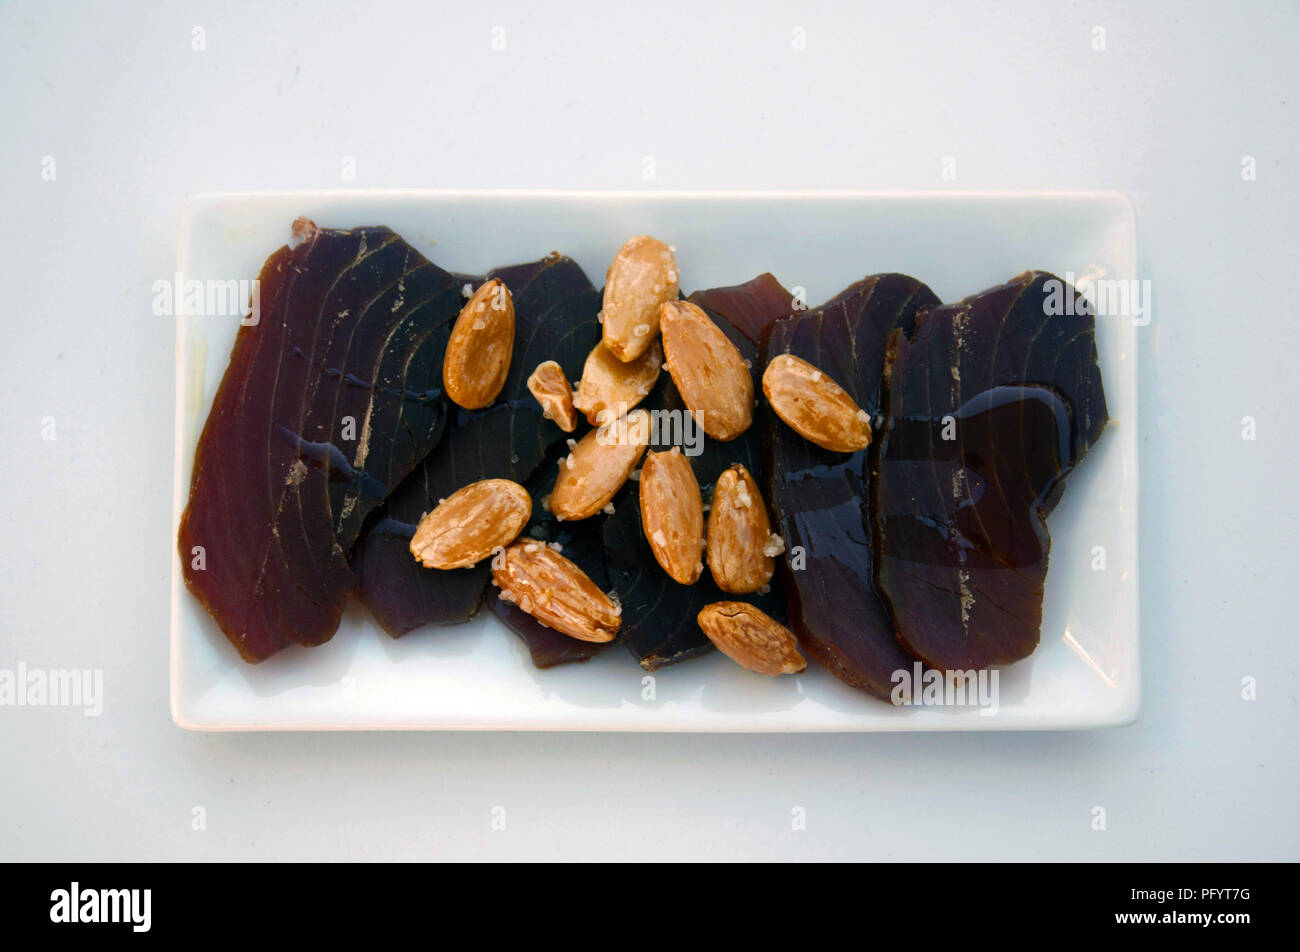 Cured brown tuna, almonds and olive oil, Spain Stock Photo